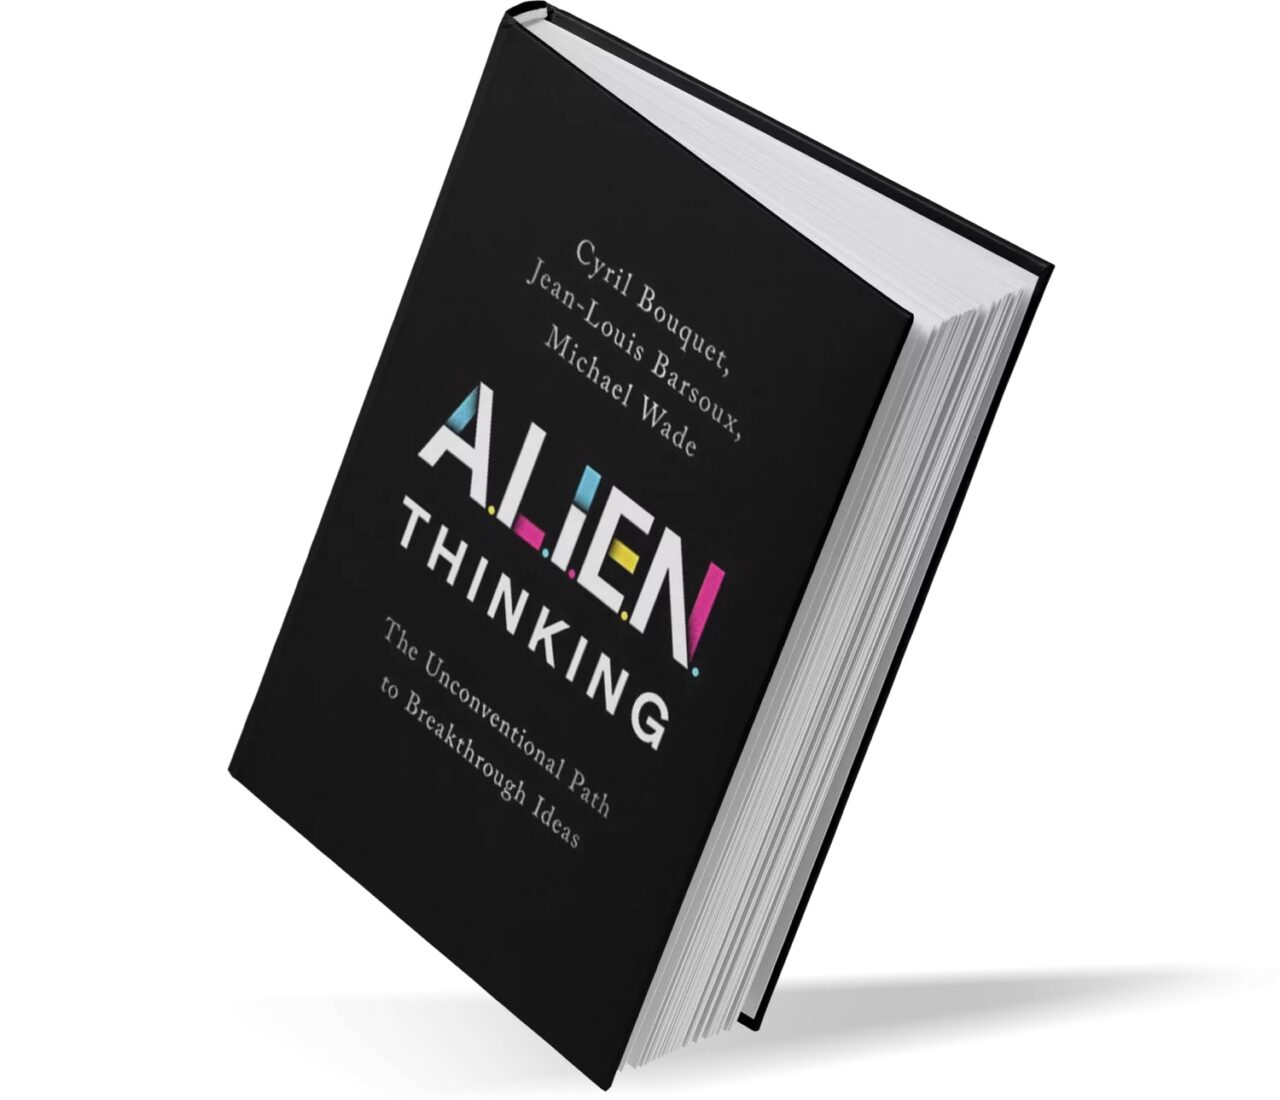 Alien-thinking-cover